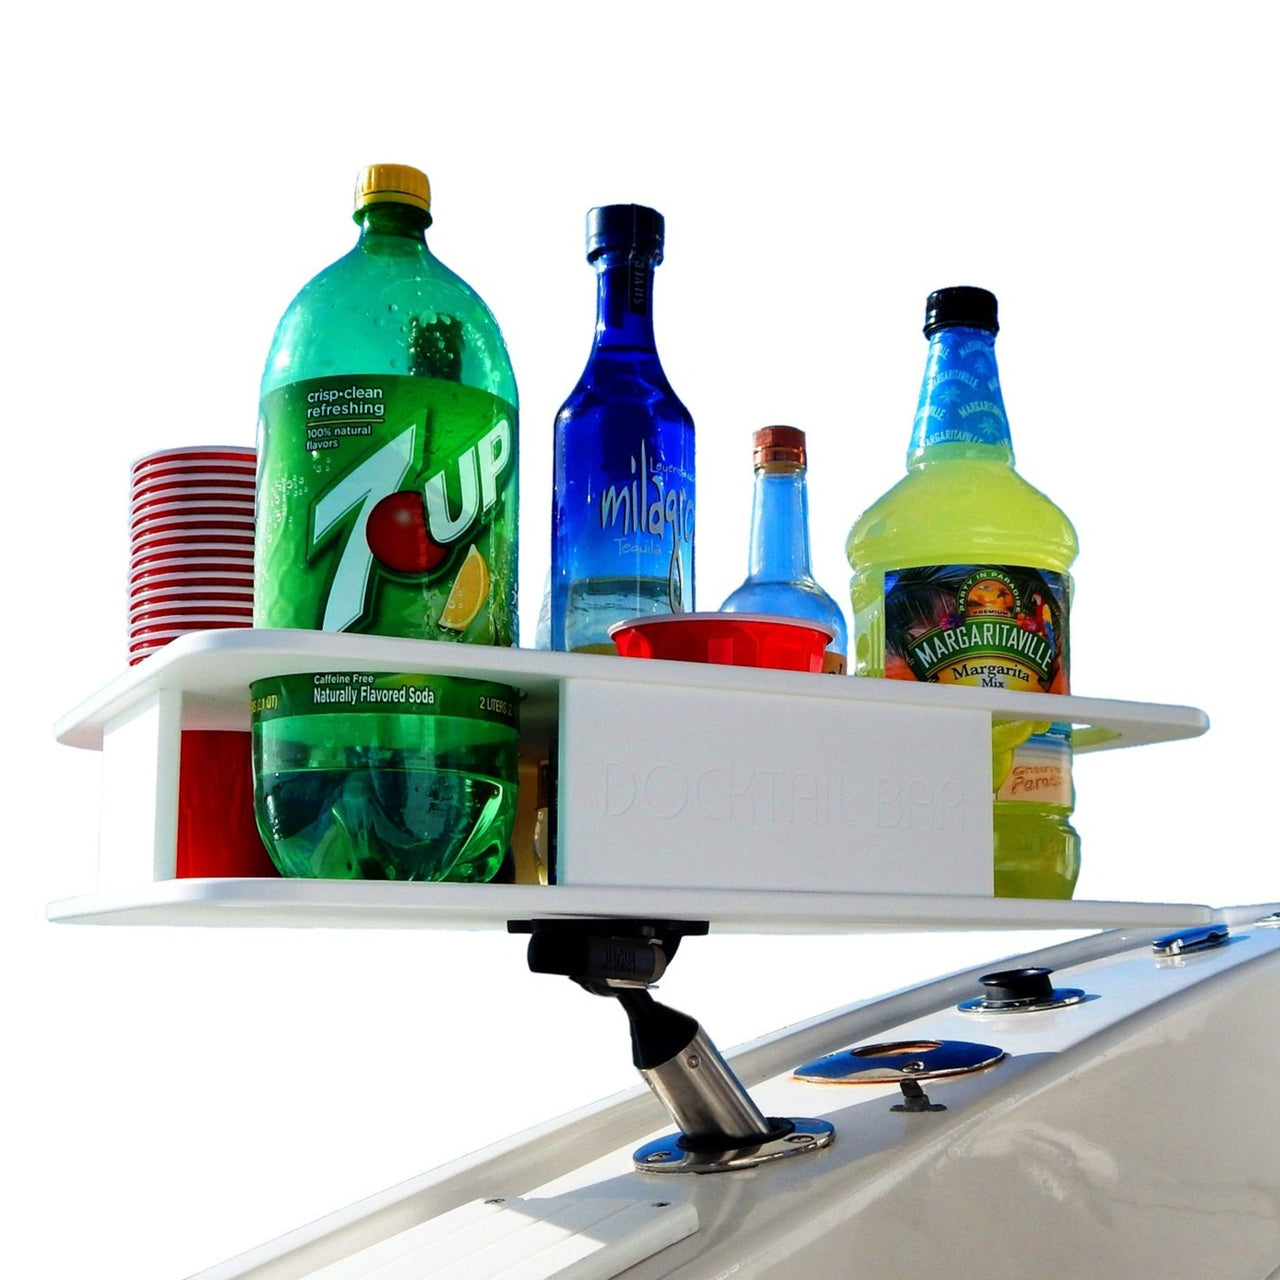 Docktail Boat Table Caddy and Storage Accessory - Choose Your Mount & Color